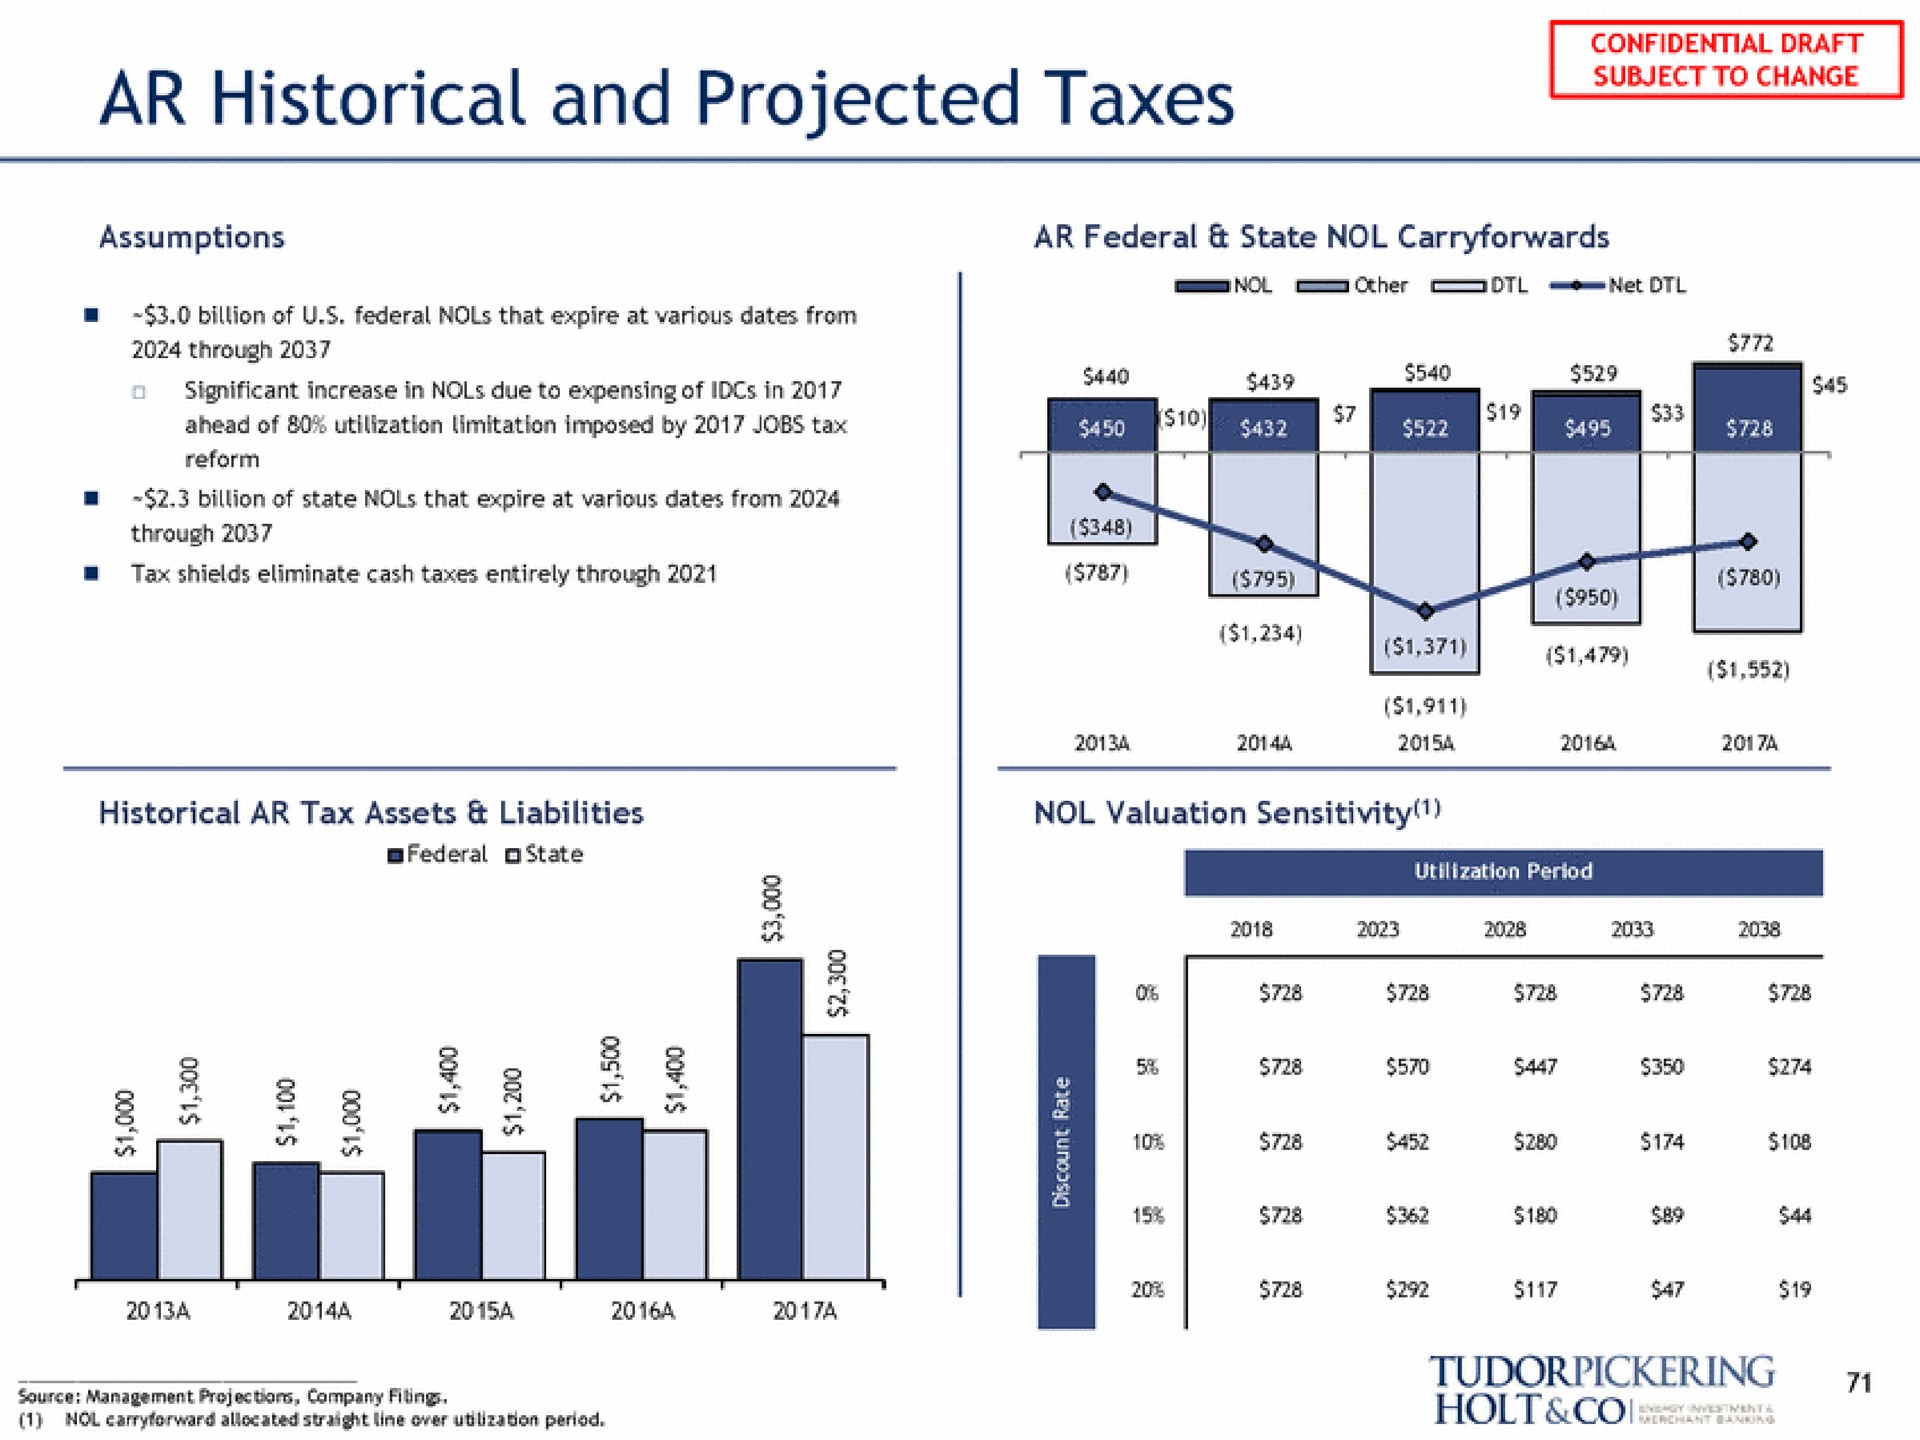 historical and projected taxes | Tudor, Pickering, Holt & Co